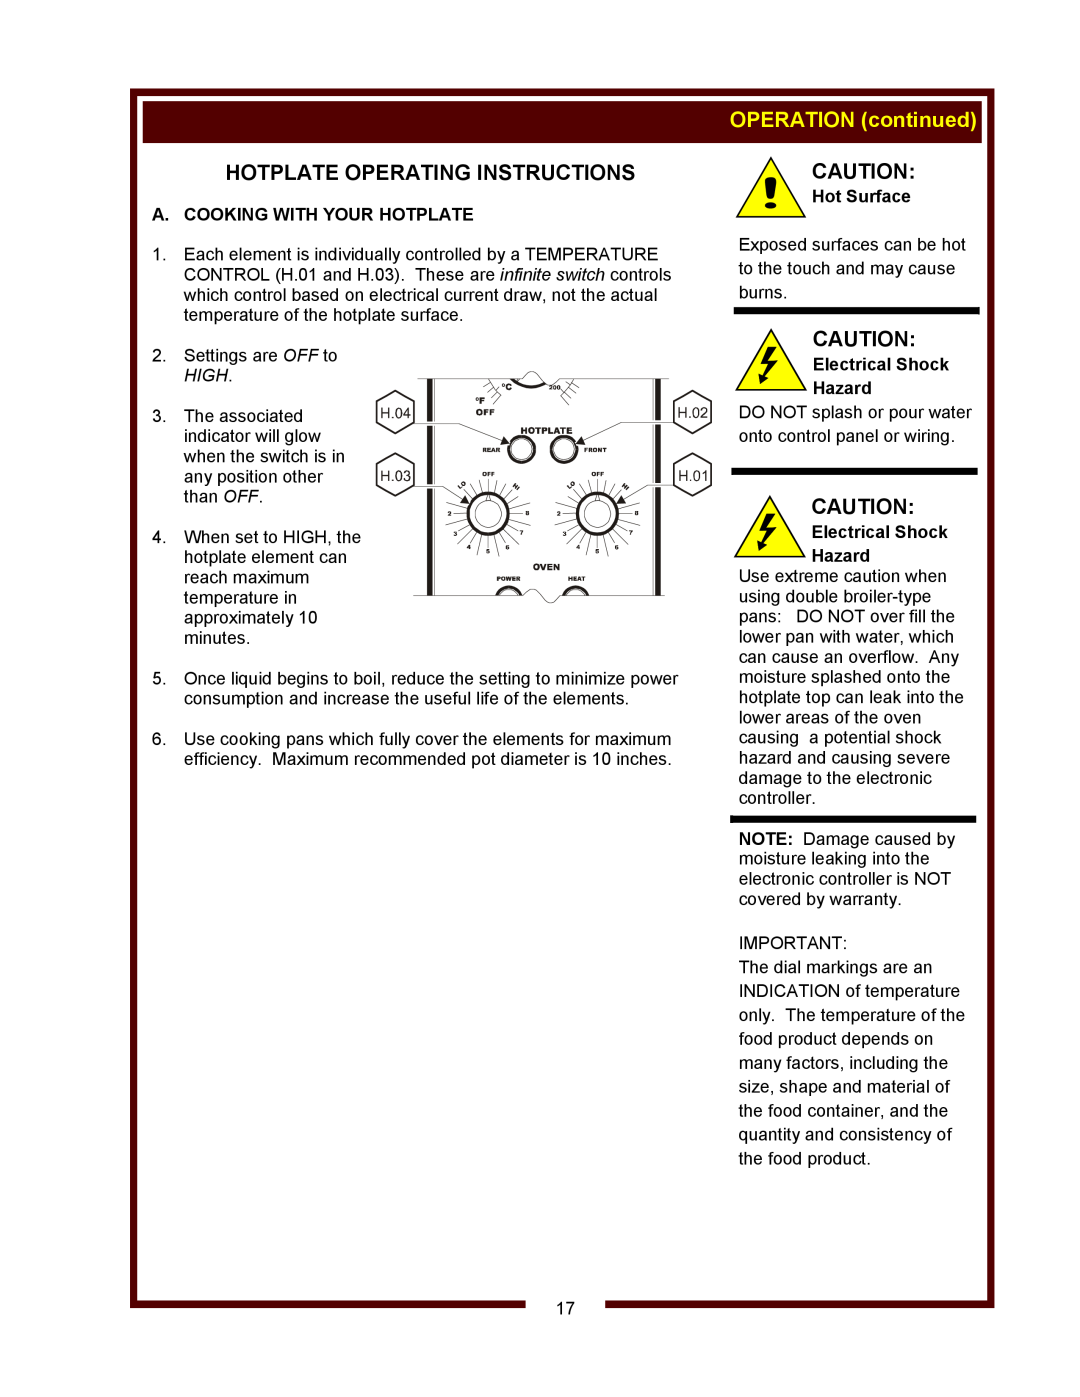 Bloomfield WVOC-2HFG, WVOC-2HSG Hotplate Operating Instructions, OPERATION continued, A. Cooking With Your Hotplate, High 